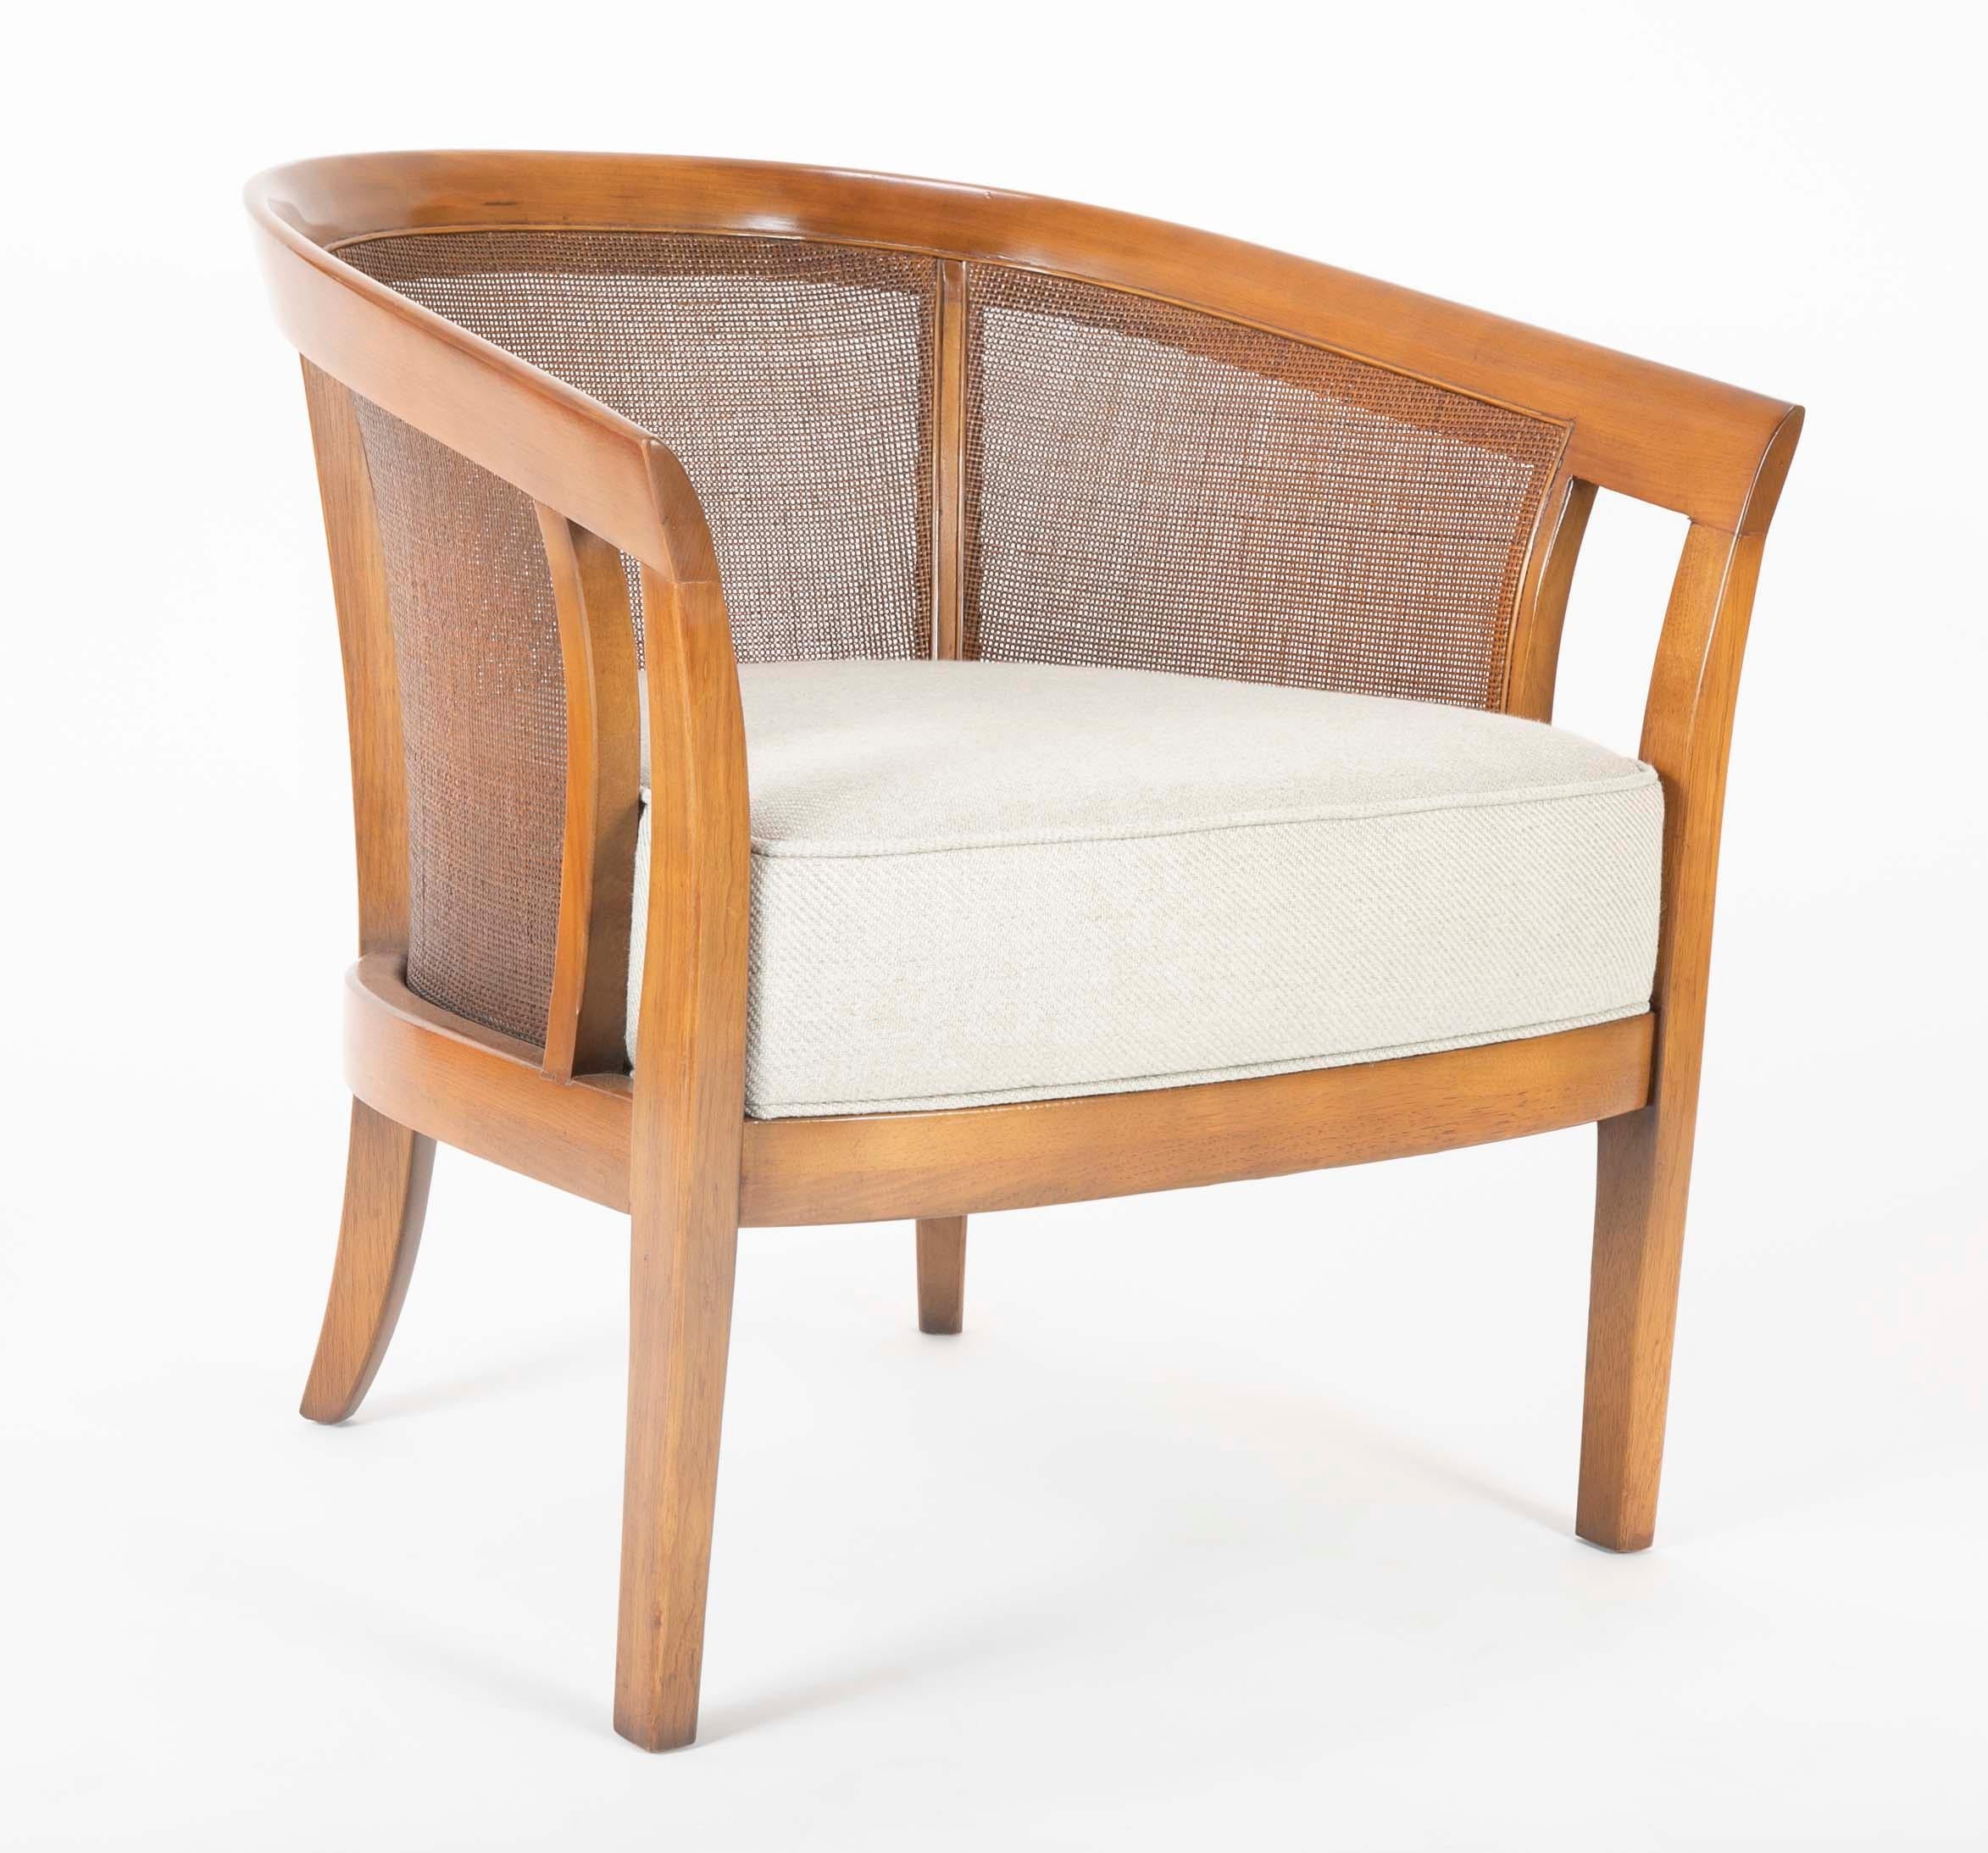 American Pair of Caned Tub Back Armchairs Designed by Edward Wormley for Dunbar